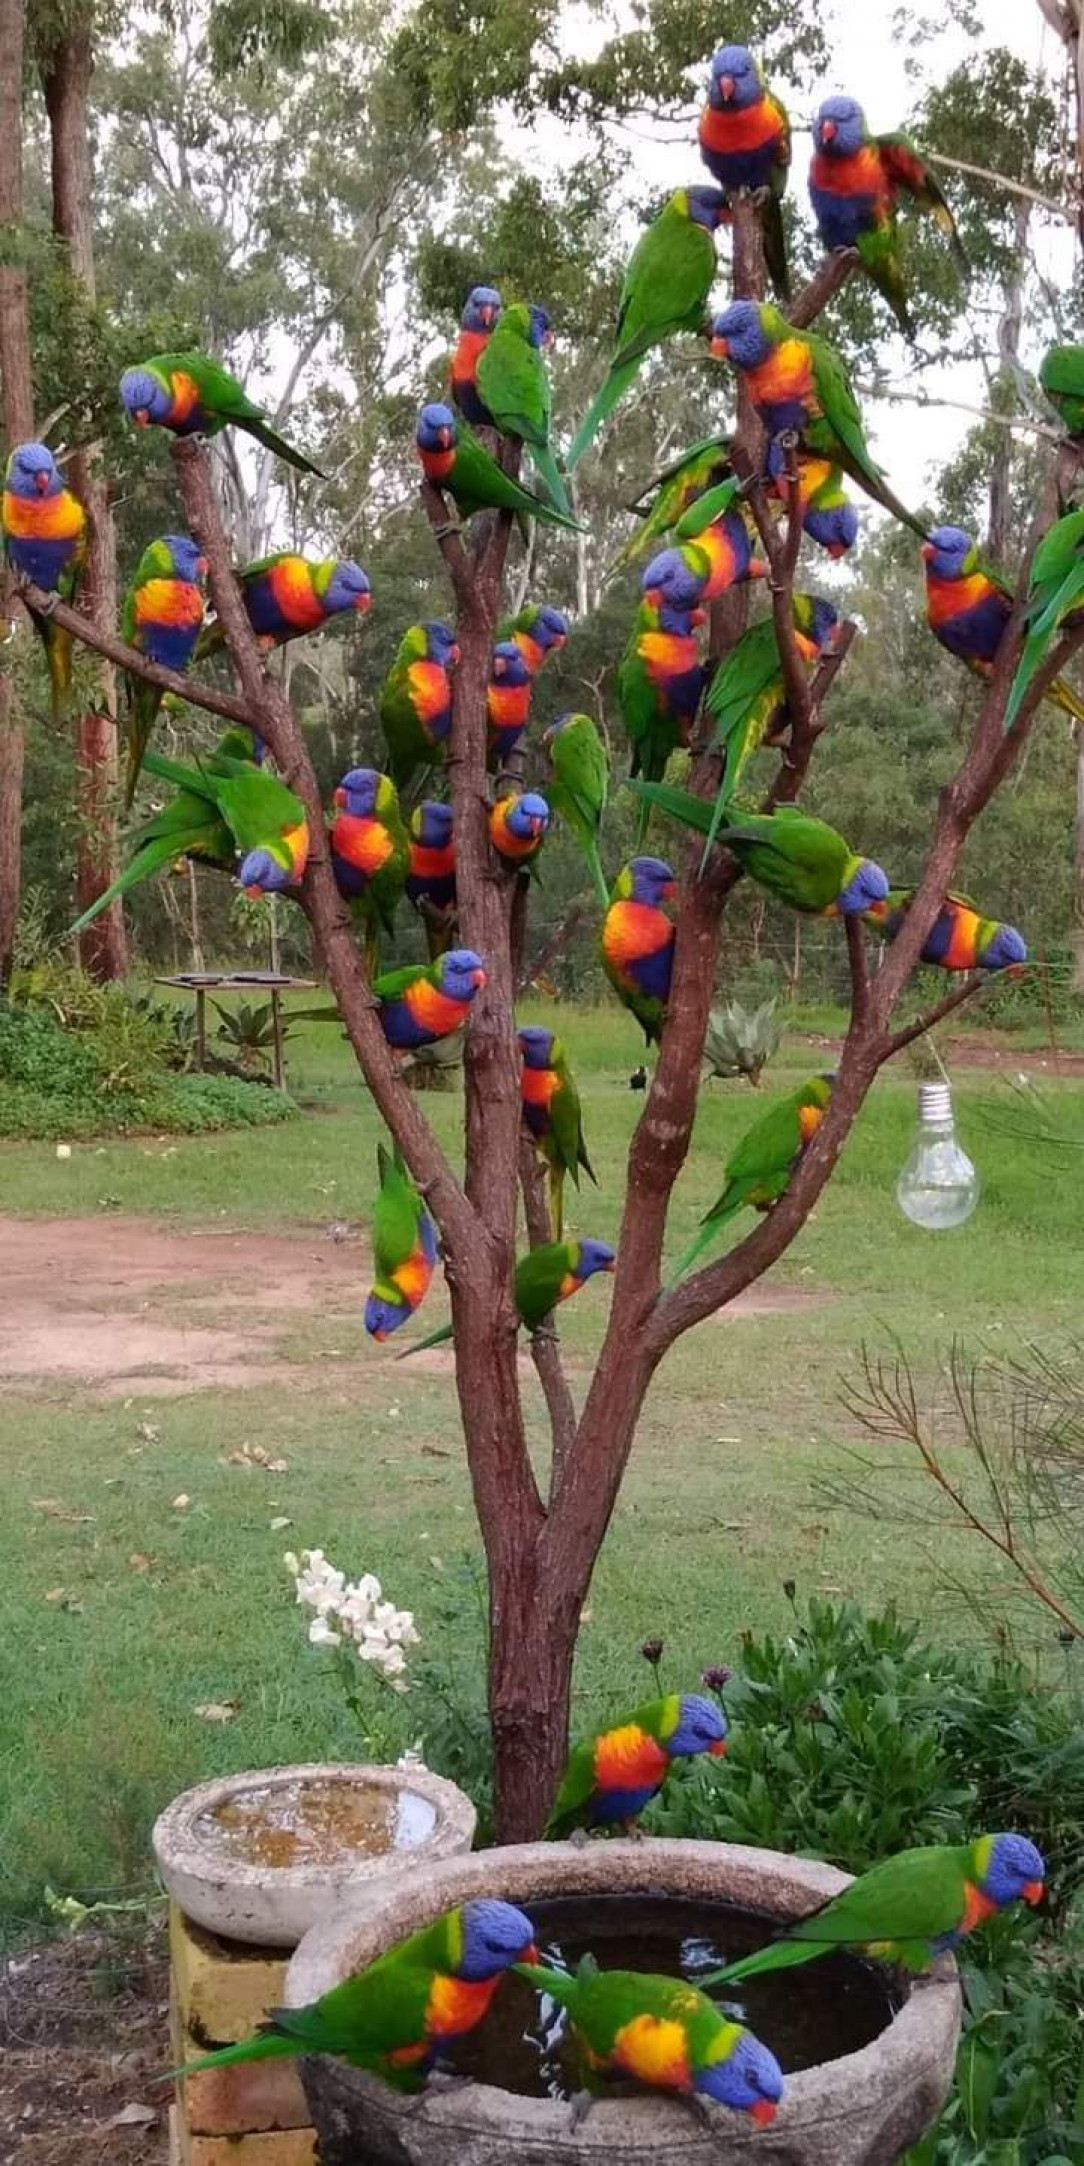 Party time of Parrots